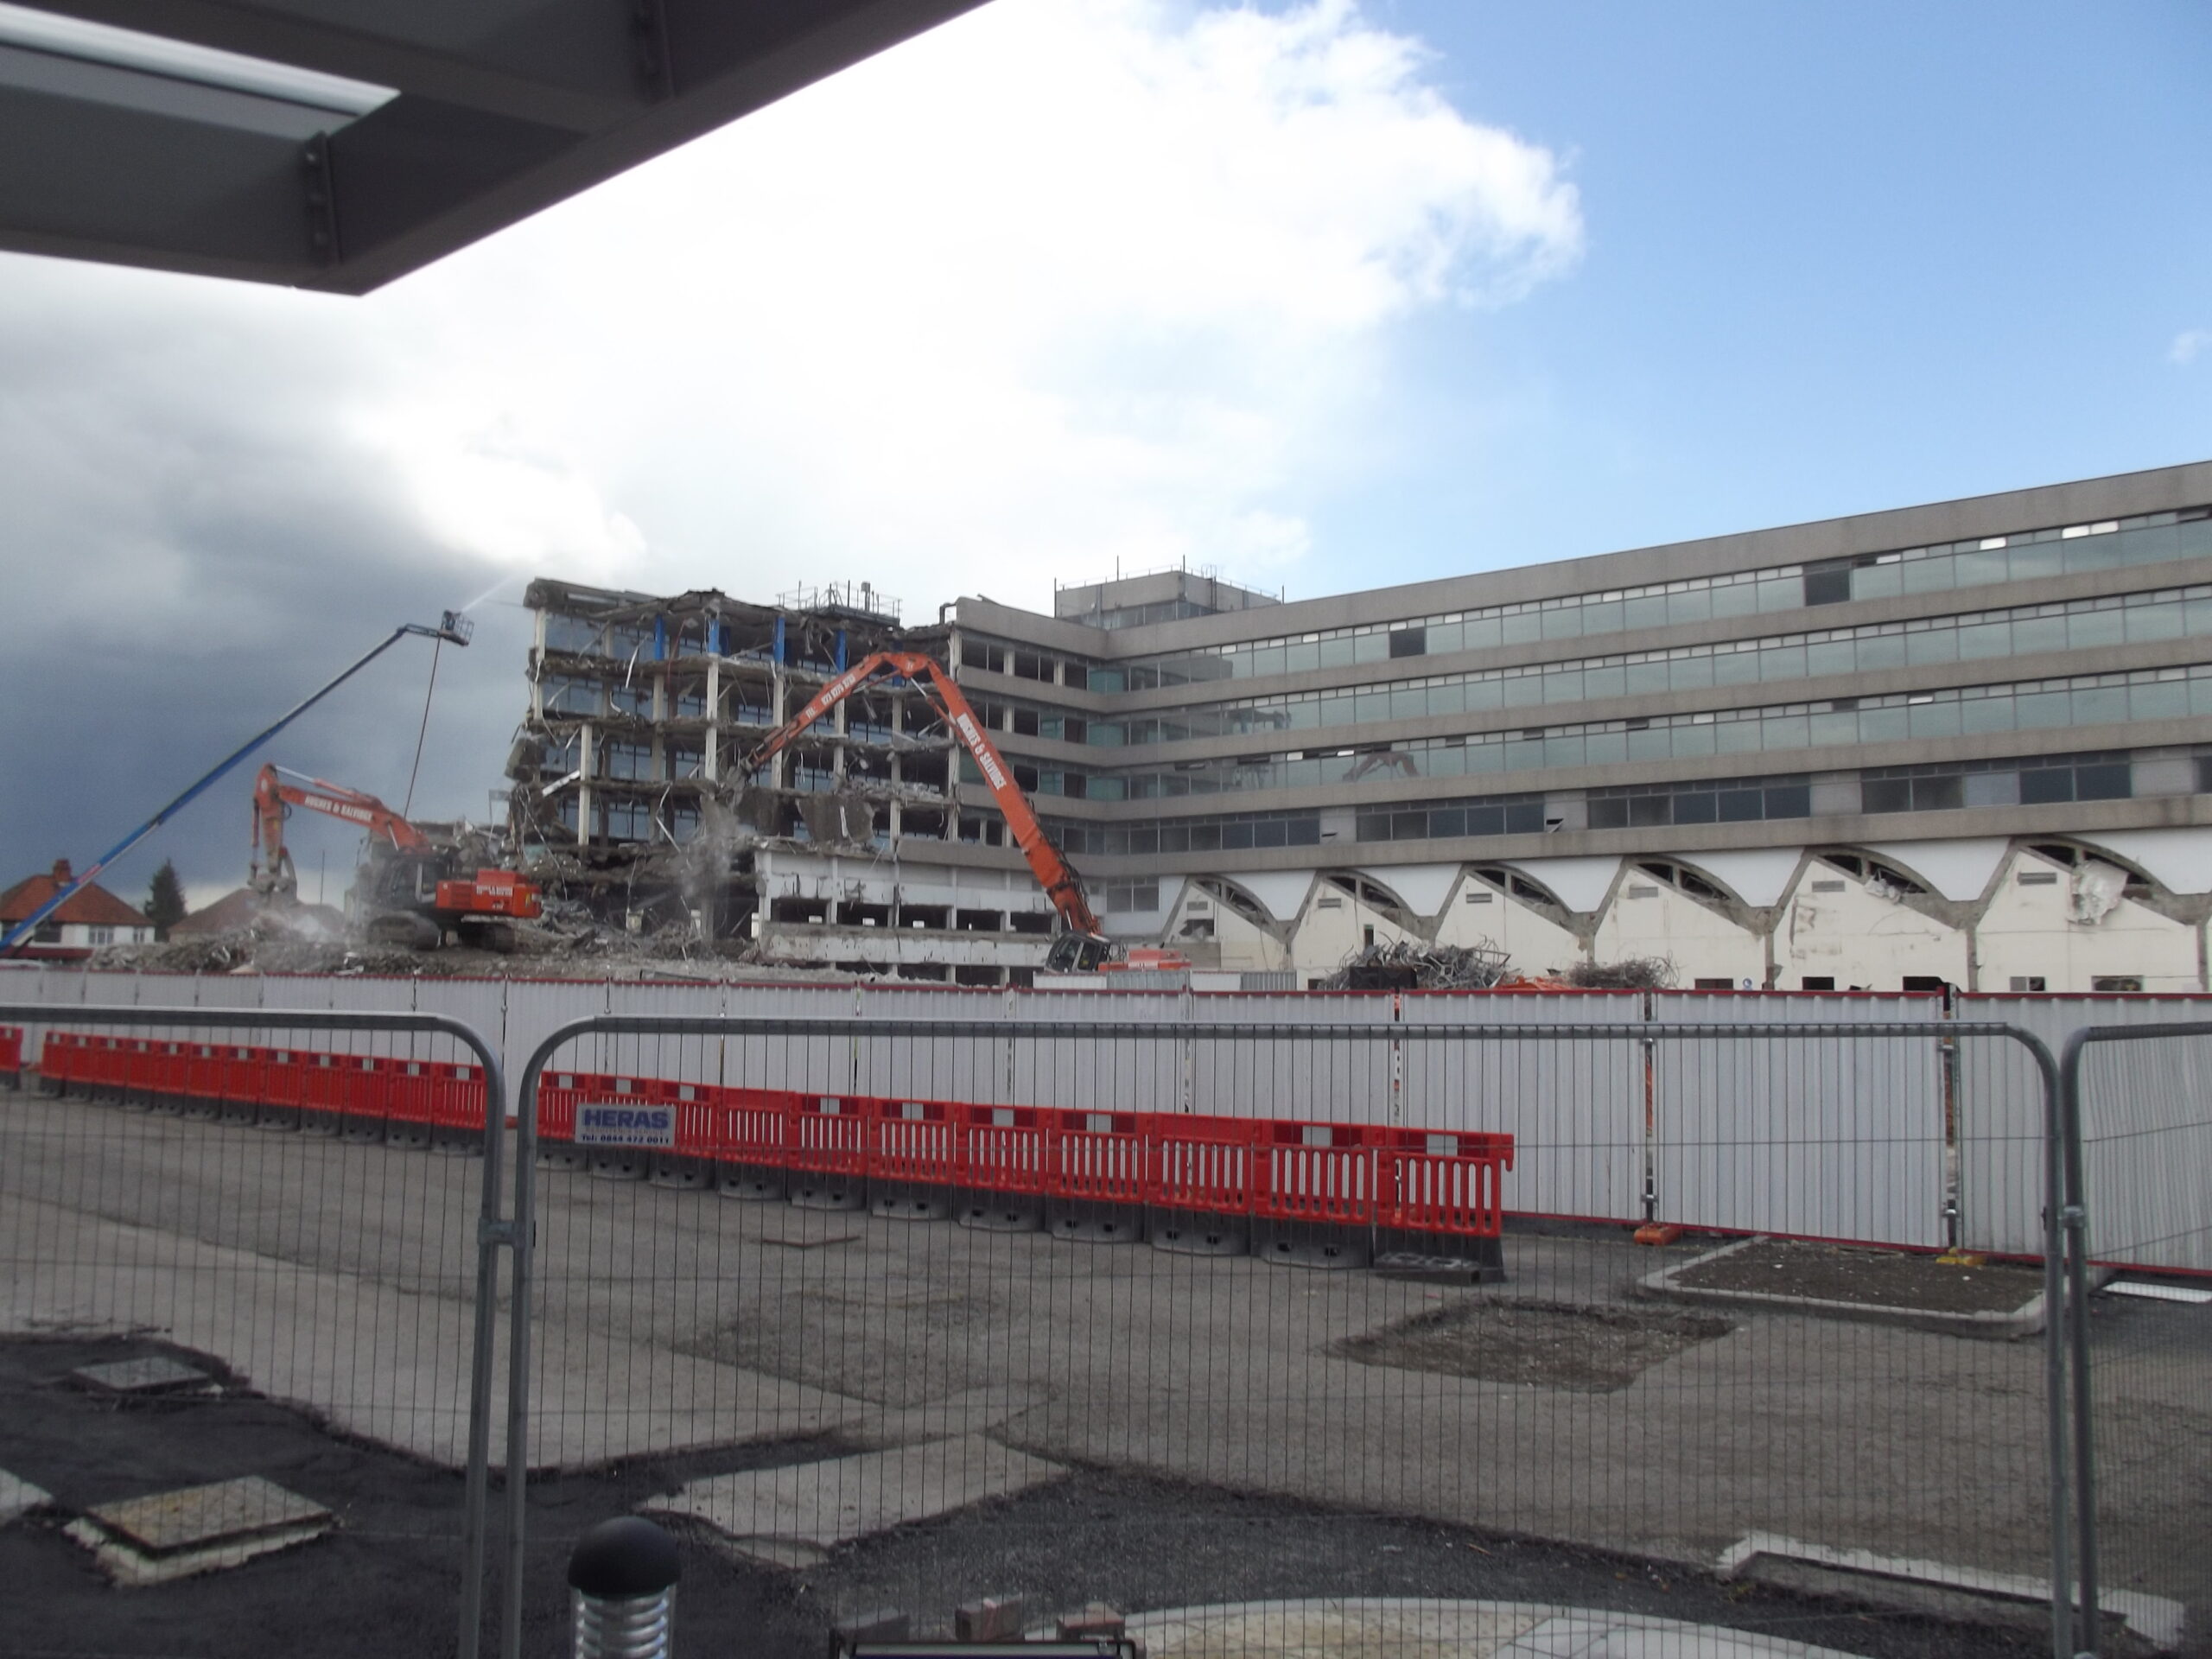 Demolition of B-C spur seen from Compass House